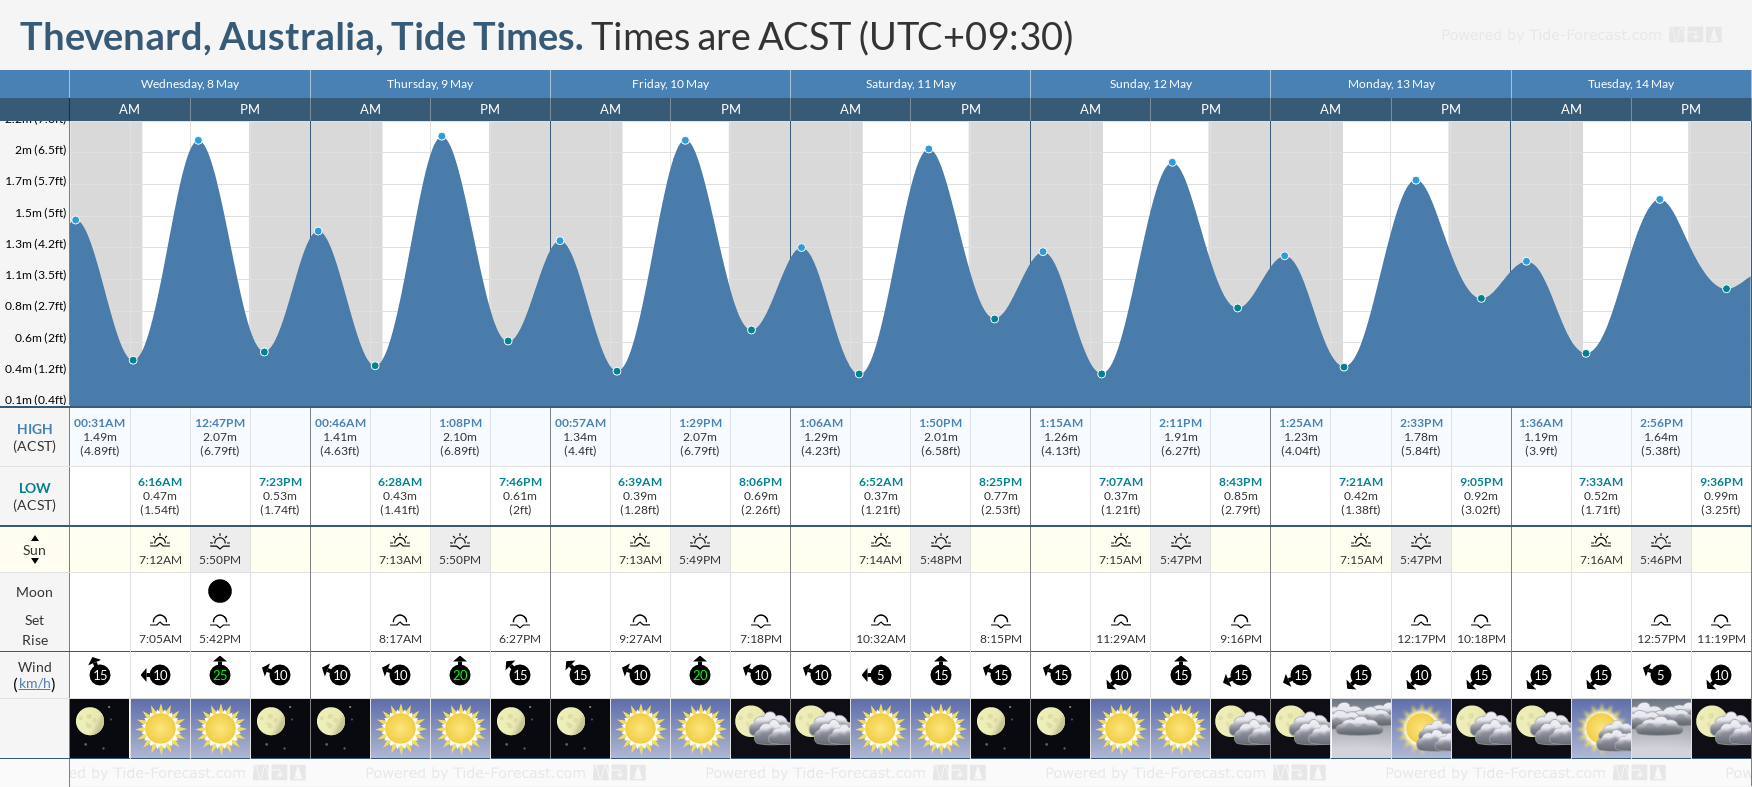 Thevenard, Australia Tide Chart including high and low tide tide times for the next 7 days